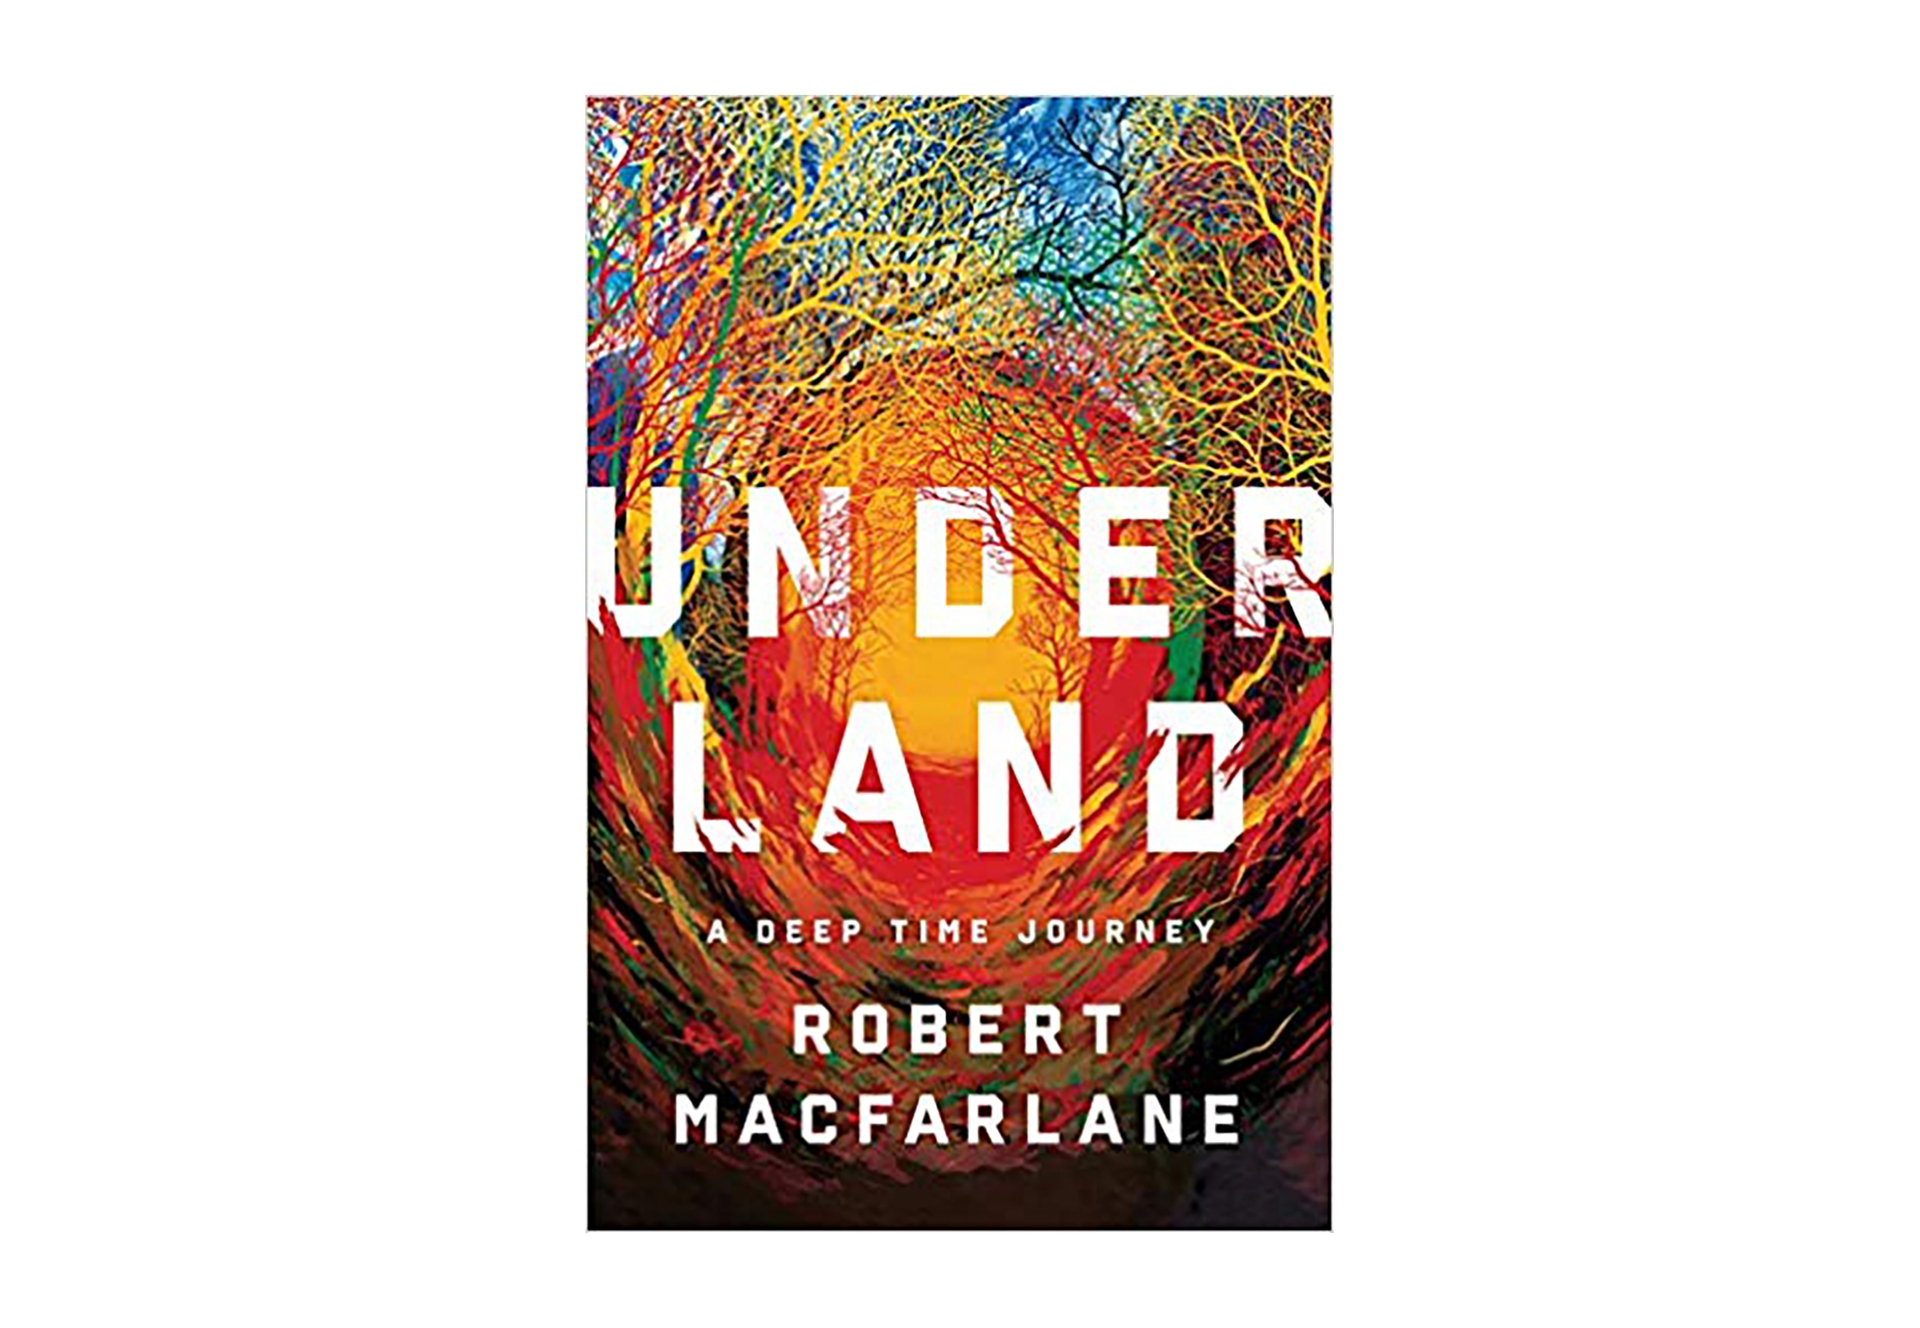 Book cover for "Underland" by Robert Macfarlane, with the title and author name printed in white serif font. The background is a swirl of colors across the spectrum, crawling up into what appears to be tree branches. 